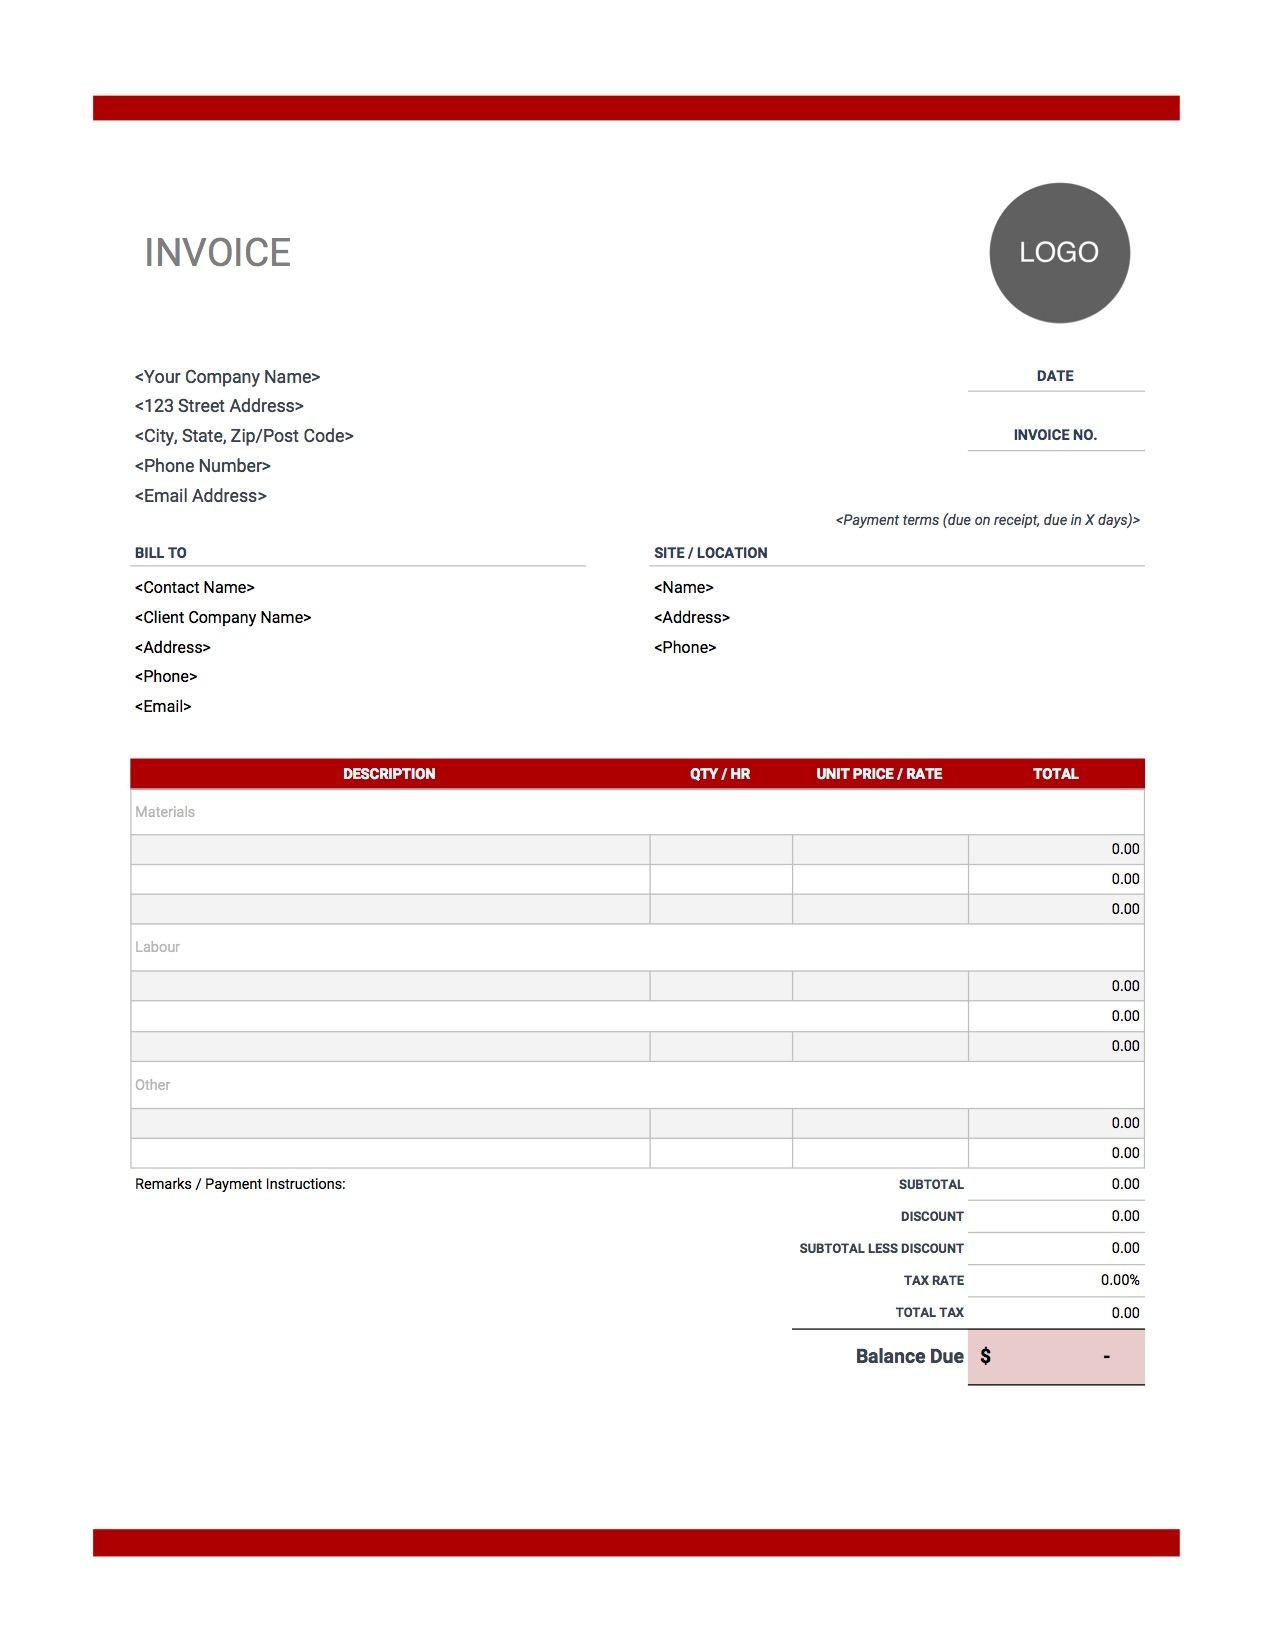 contractor invoice templates free download invoice simple contractor invoice gst bill format example